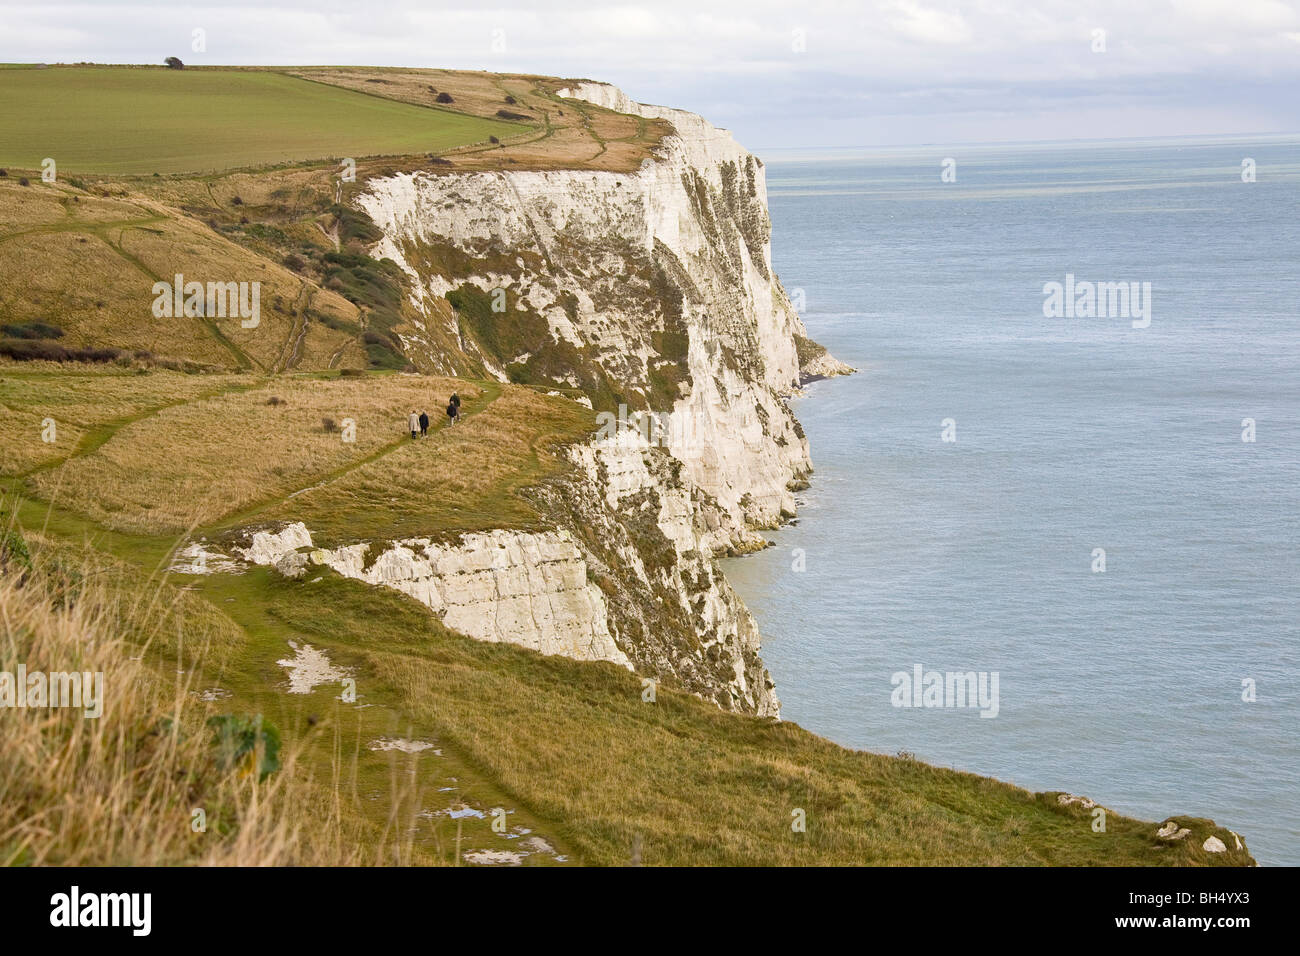 Hillwalking on the white cliffs along the coast of Dover. Stock Photo